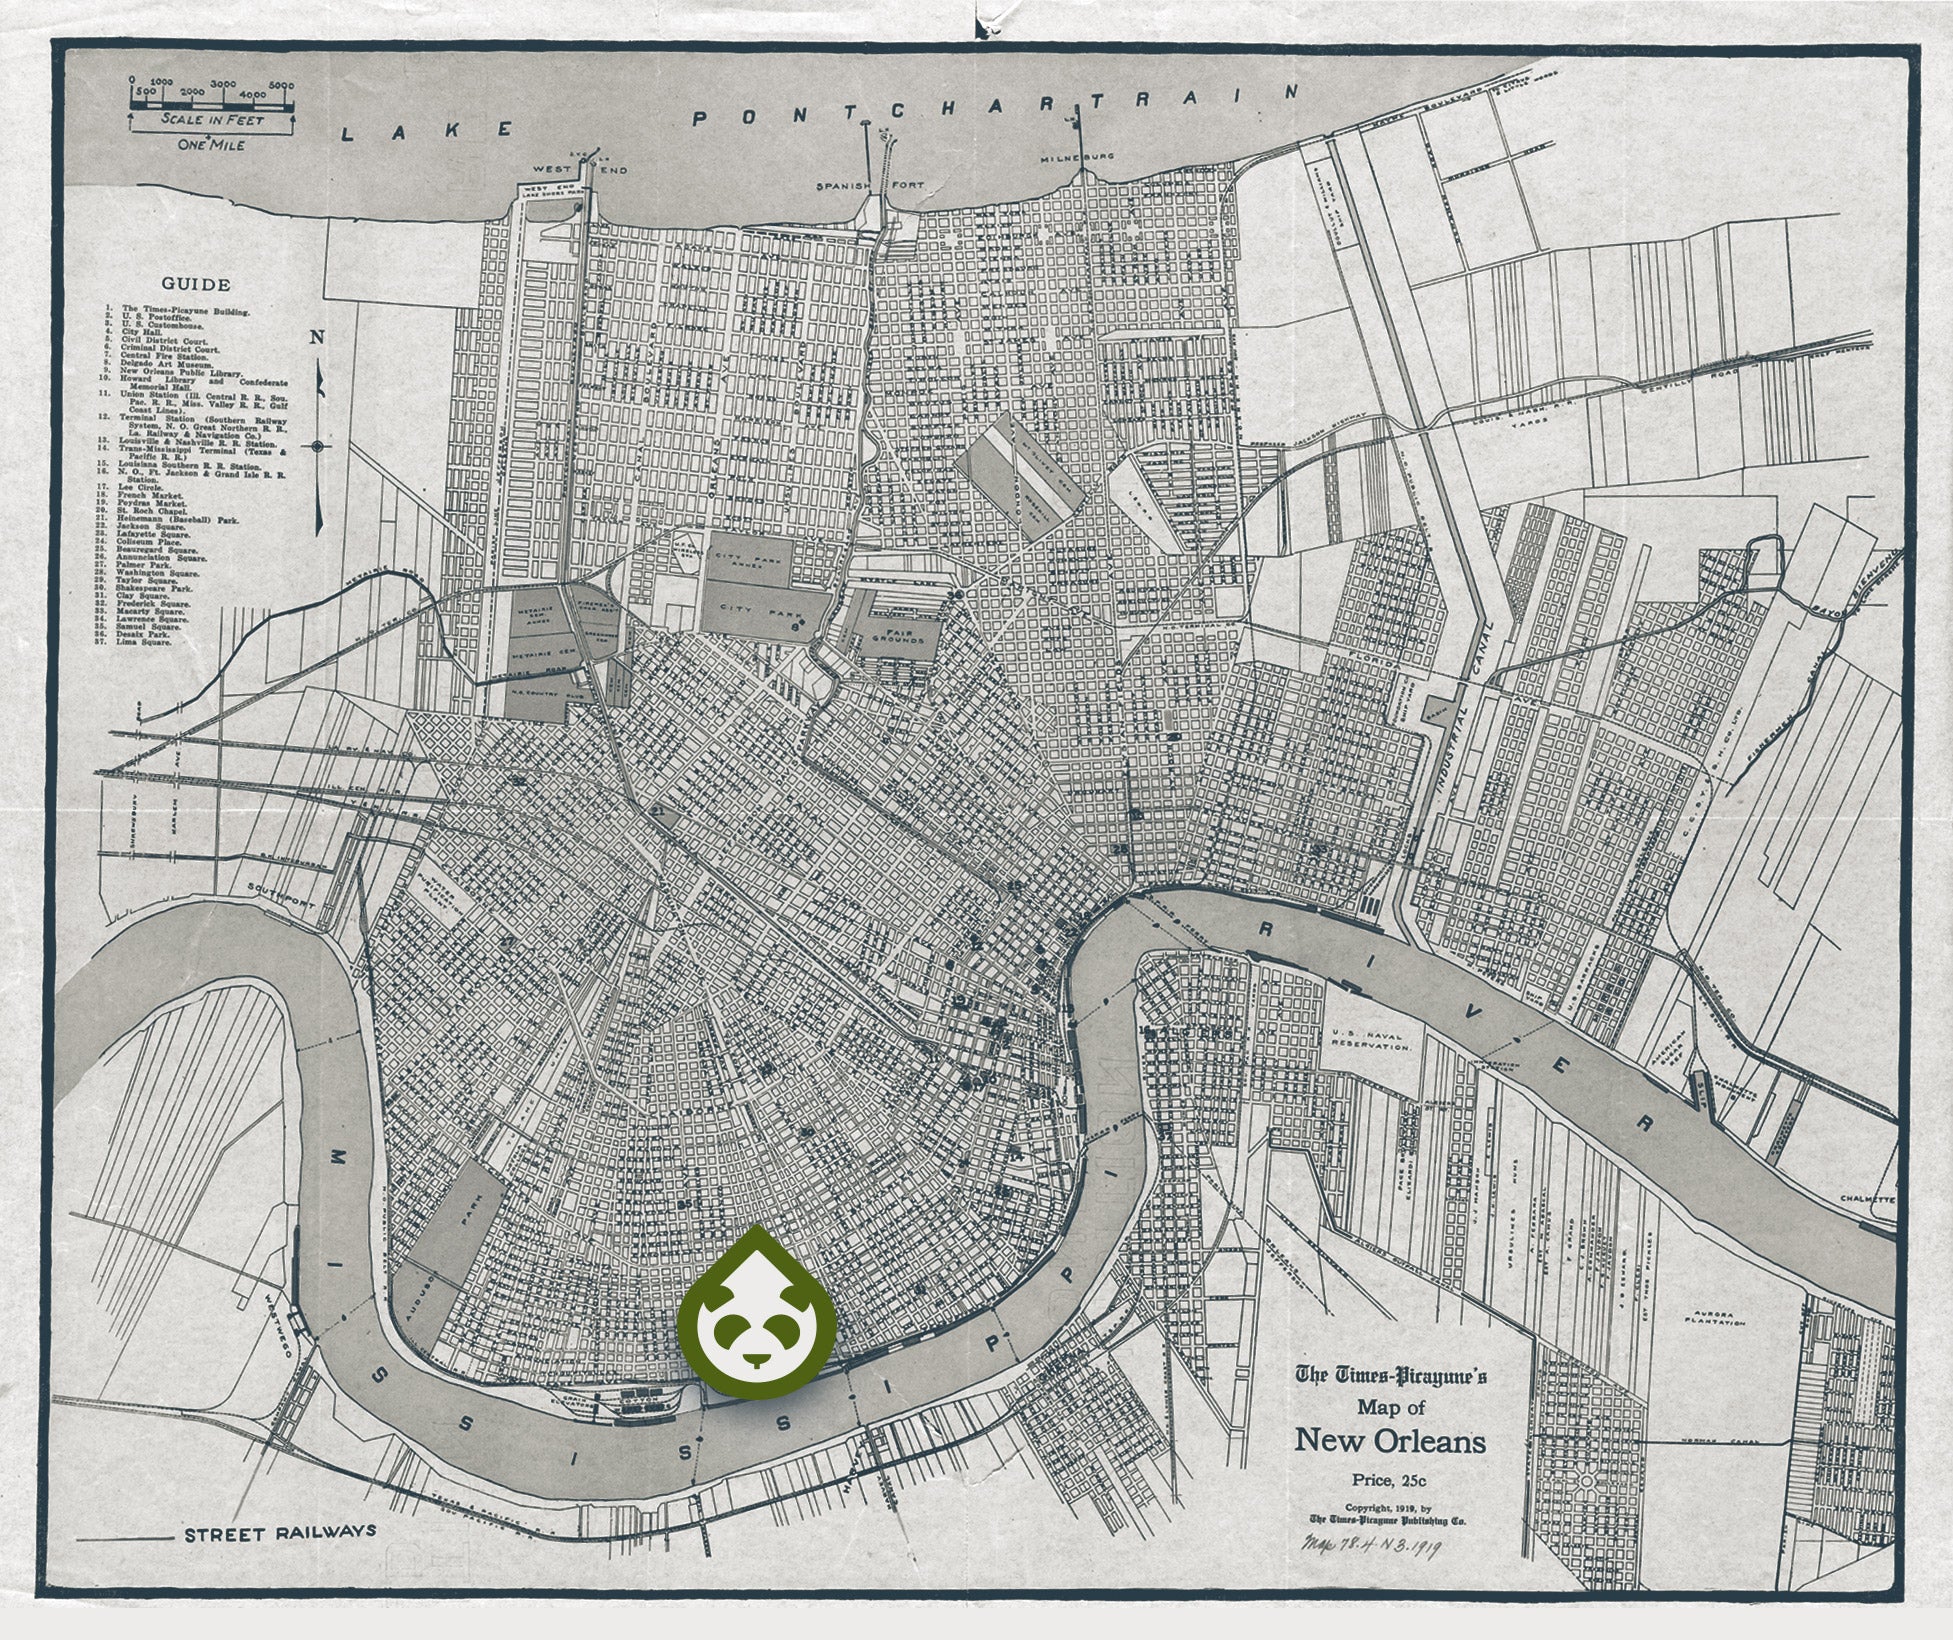 map of new orleans showing out tasc location on magazine street 